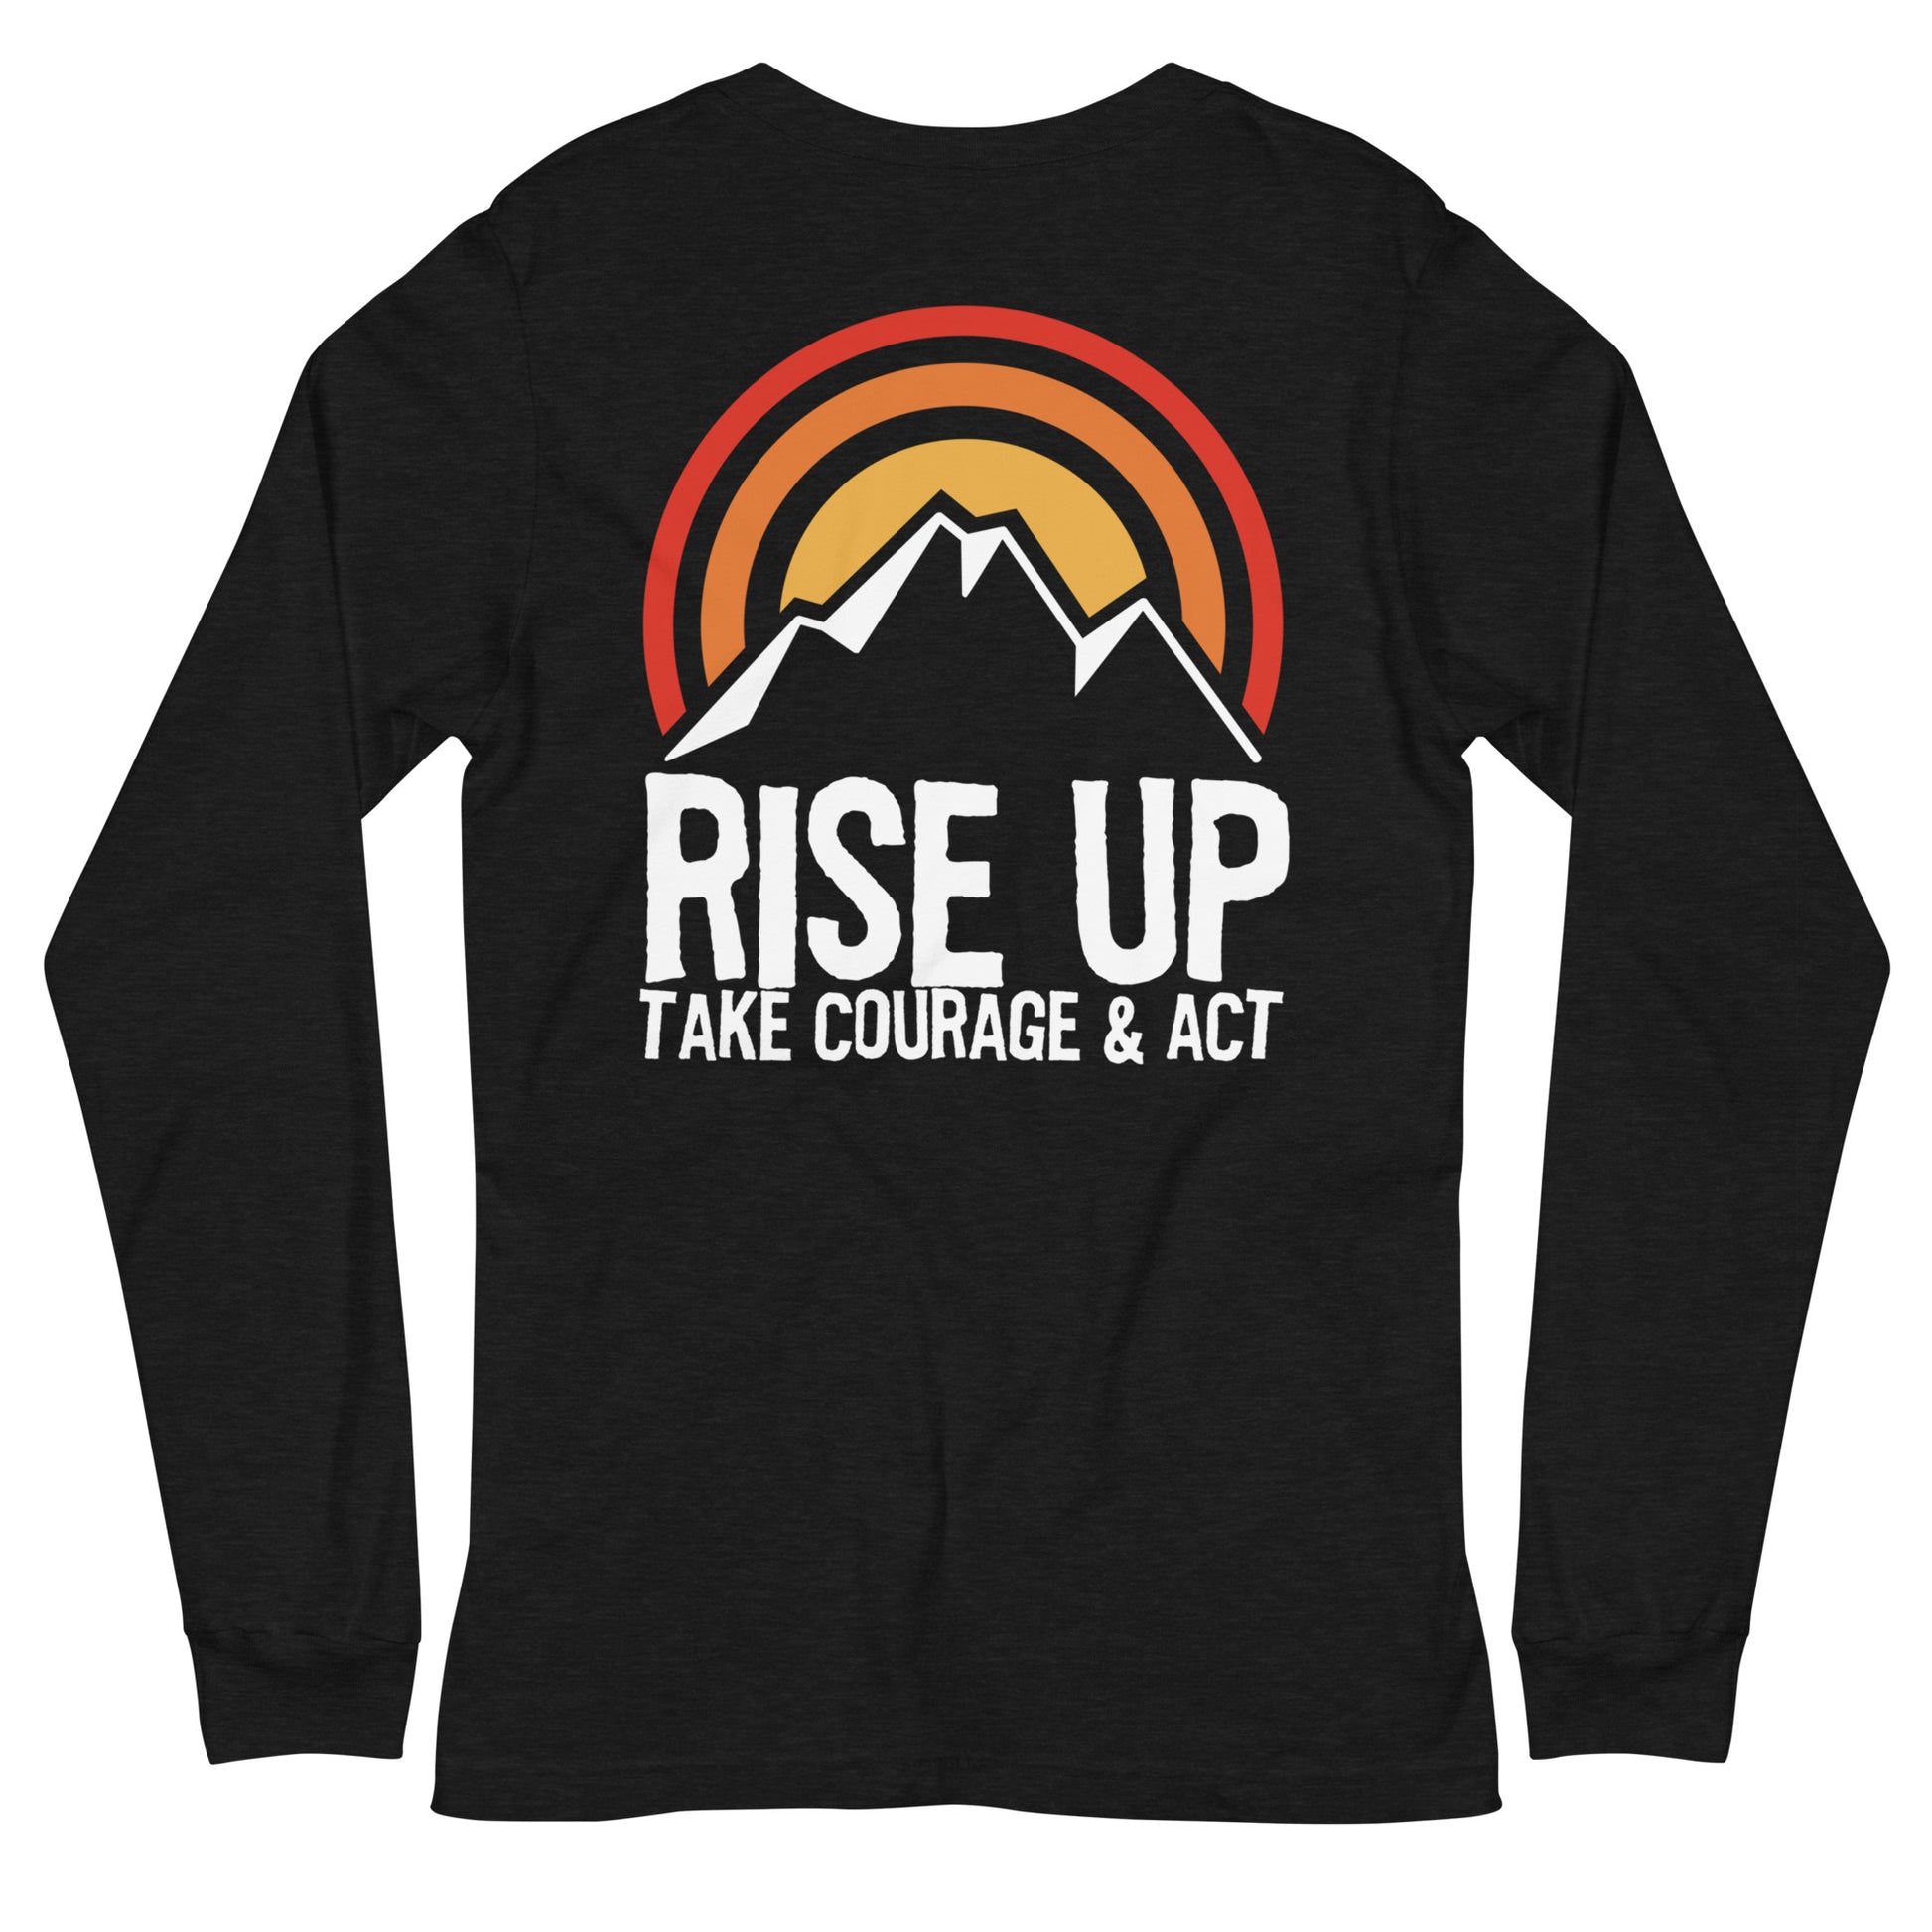 Rise Up! - Long Sleeve - For Your Courage